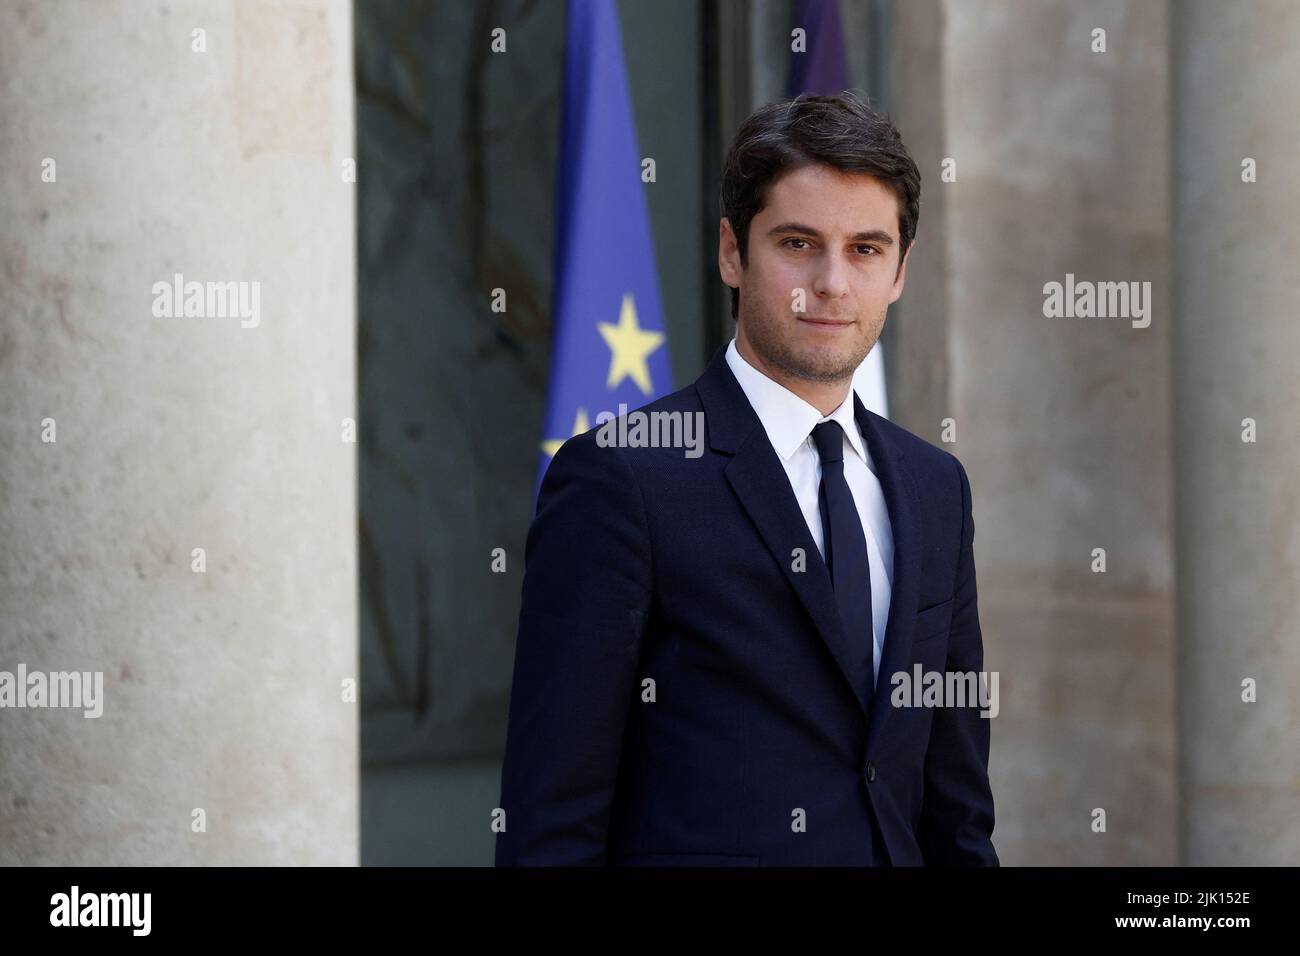 French Junior Minister for Public Accounts Gabriel Attal leaves the Elysee Palace after the weekly cabinet meeting in Paris, France, July 29, 2022. REUTERS/Benoit Tessier Stock Photo